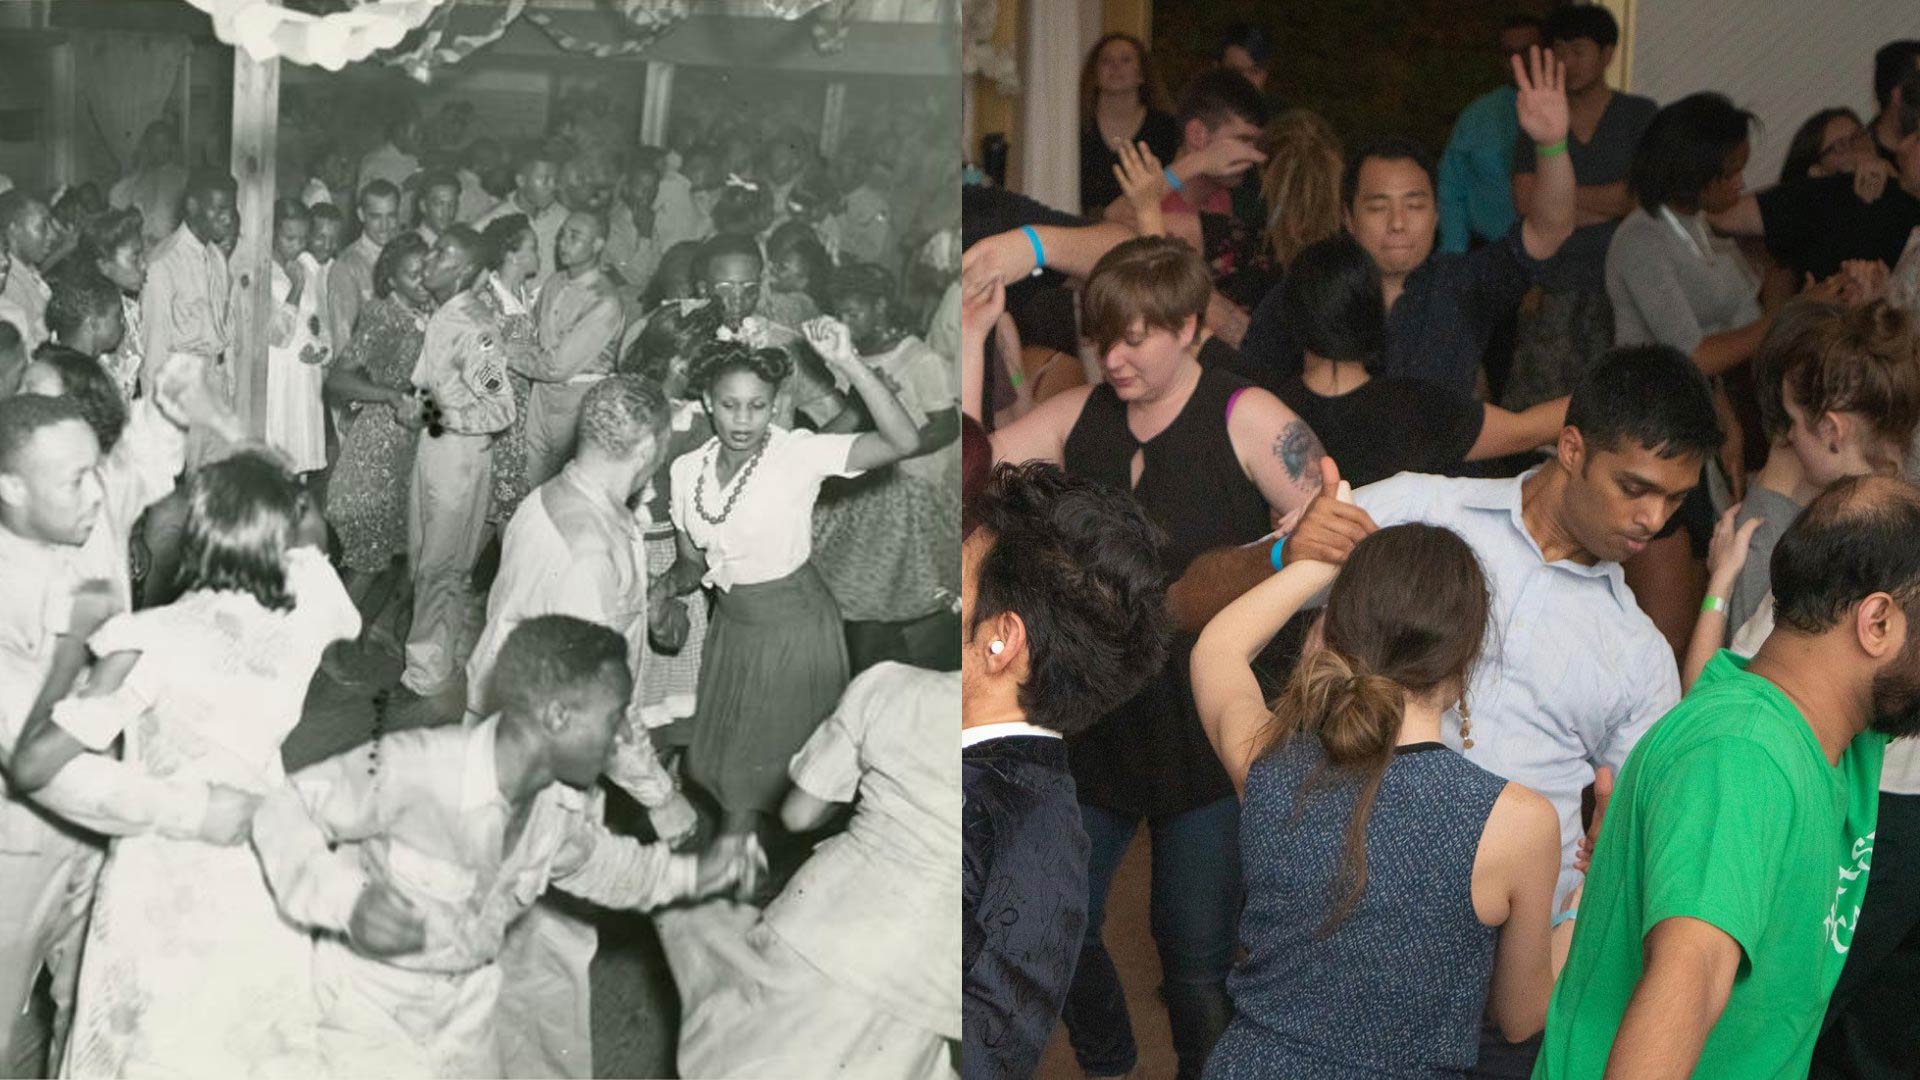 vintage photo of predominantly african-american dance club scene and a modern mixed-race dance scene